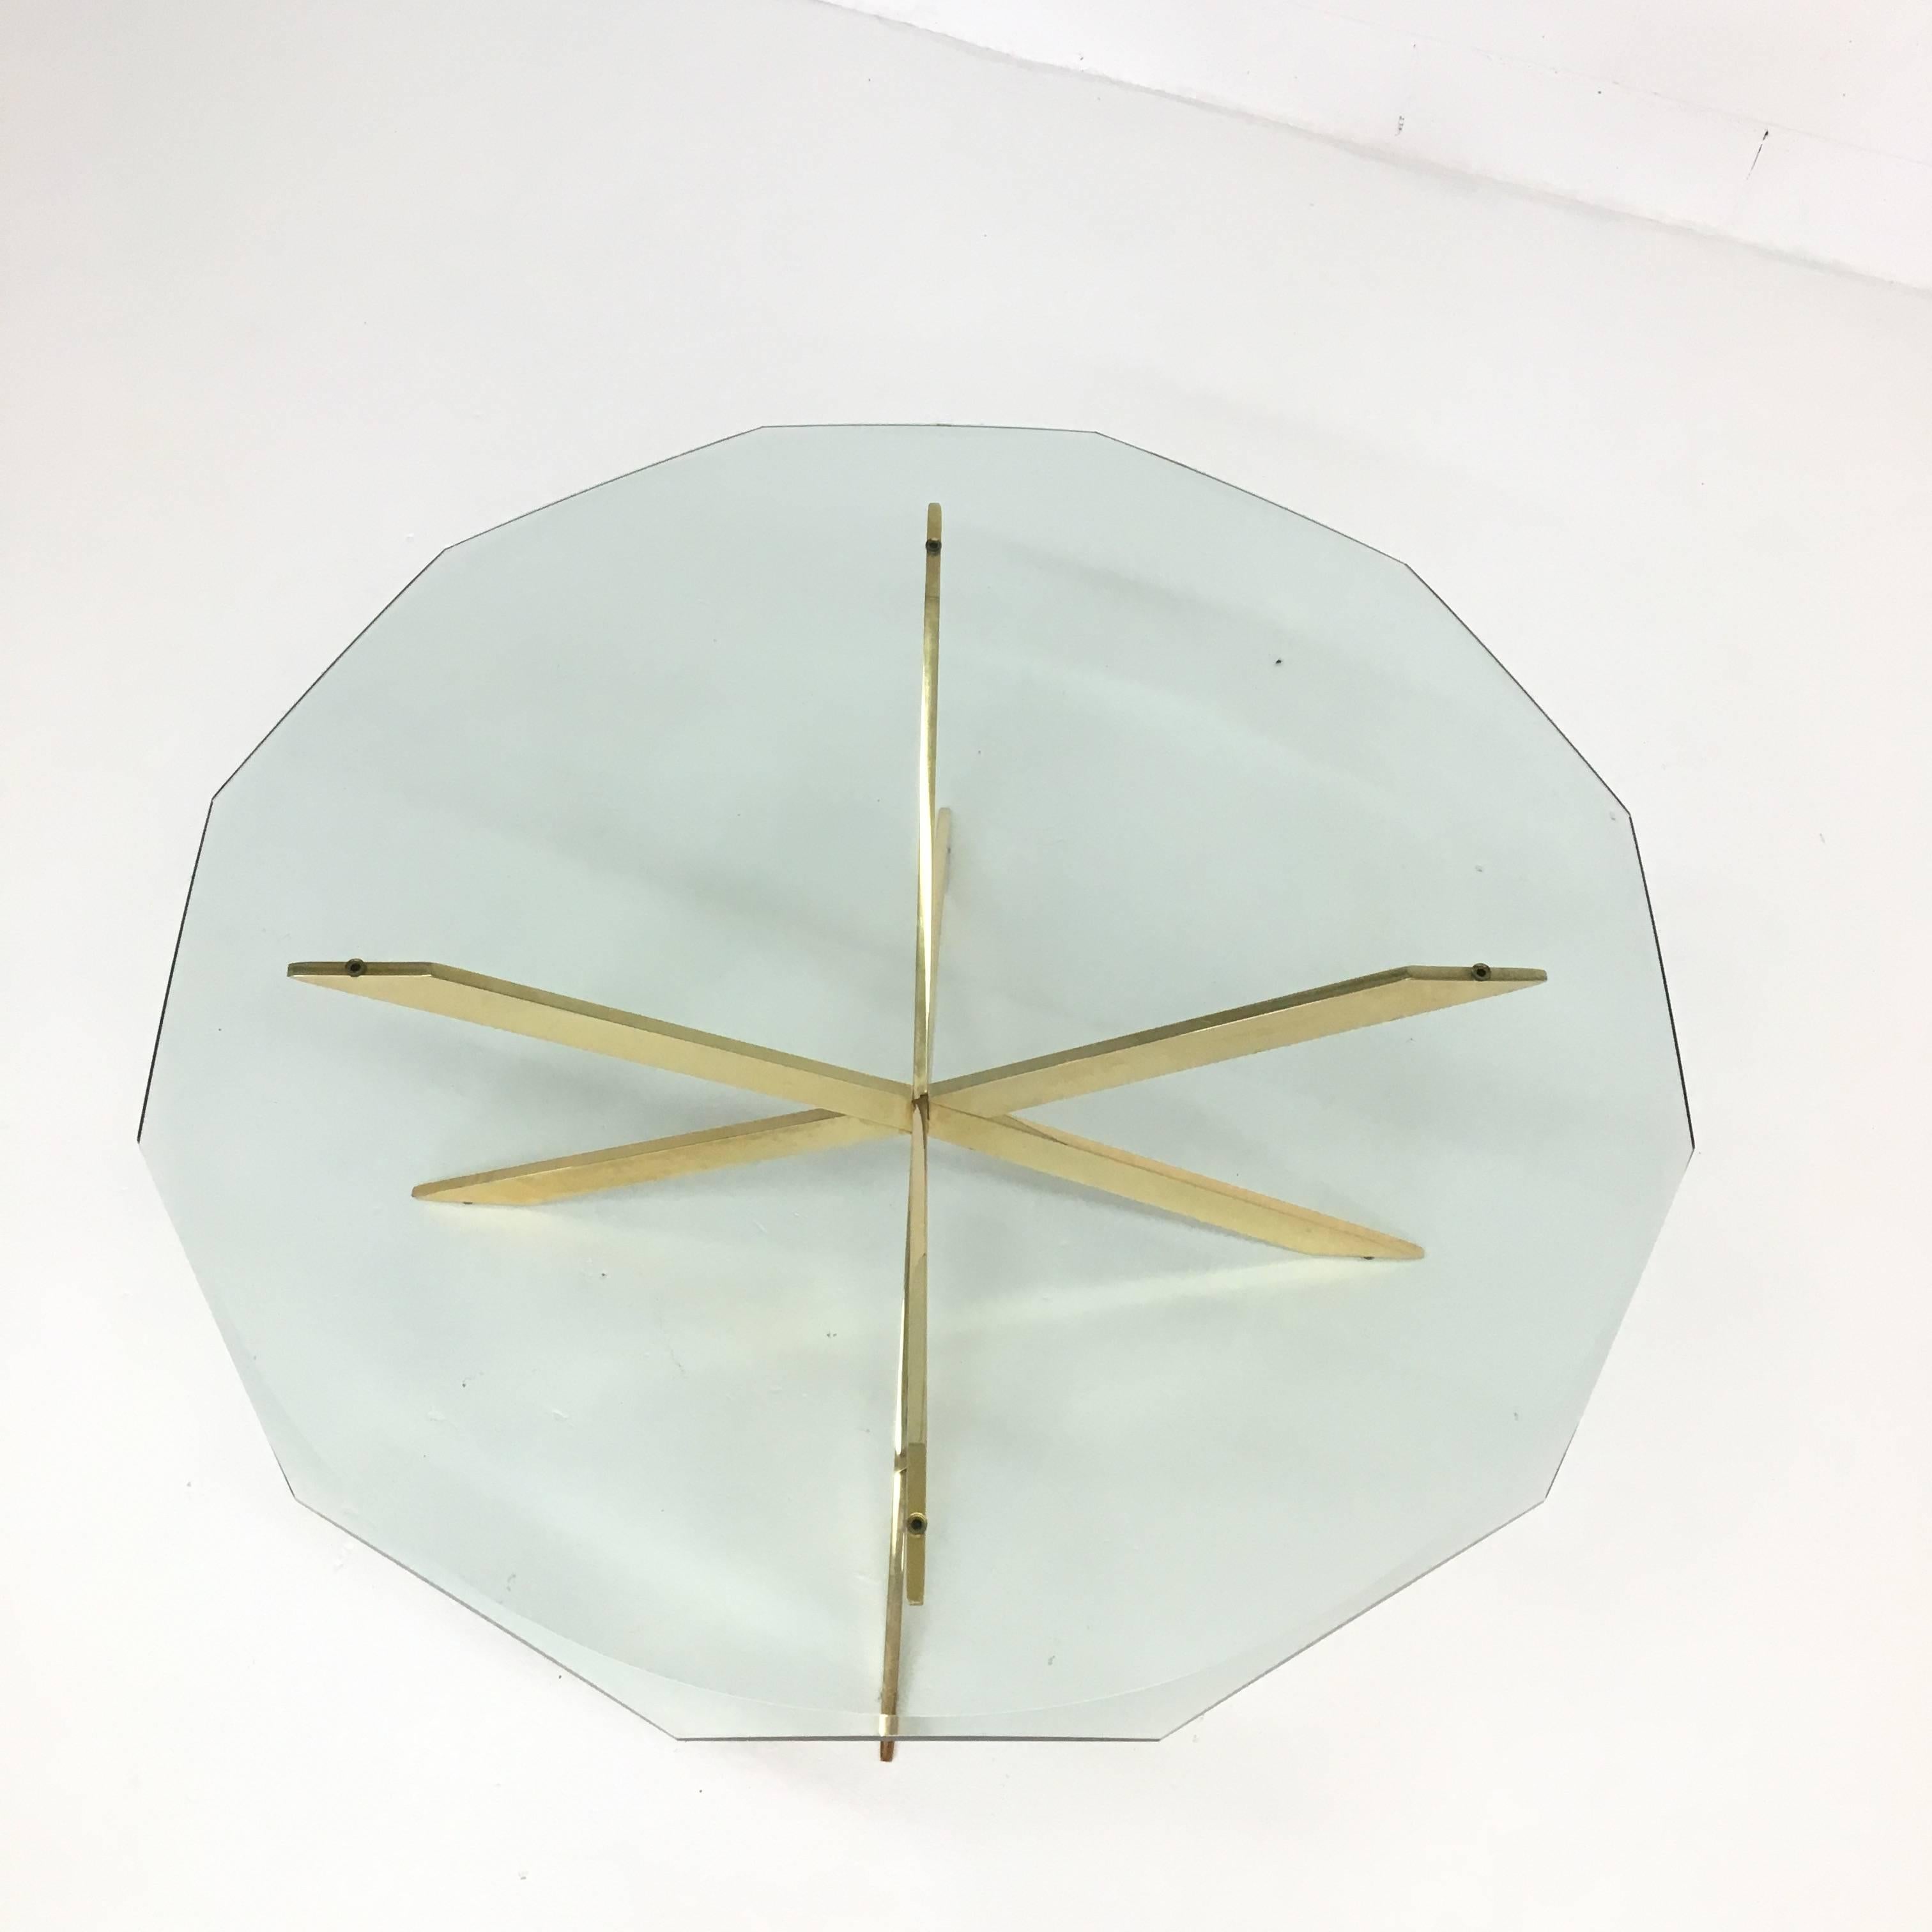 What a beauty! This Leon Rosen for Pace coffee table has no equal. Very rare brass double X-base with a 12/beveled edge thick glass top. Minimal age appropriate wear, glass has a few very minor scratches.